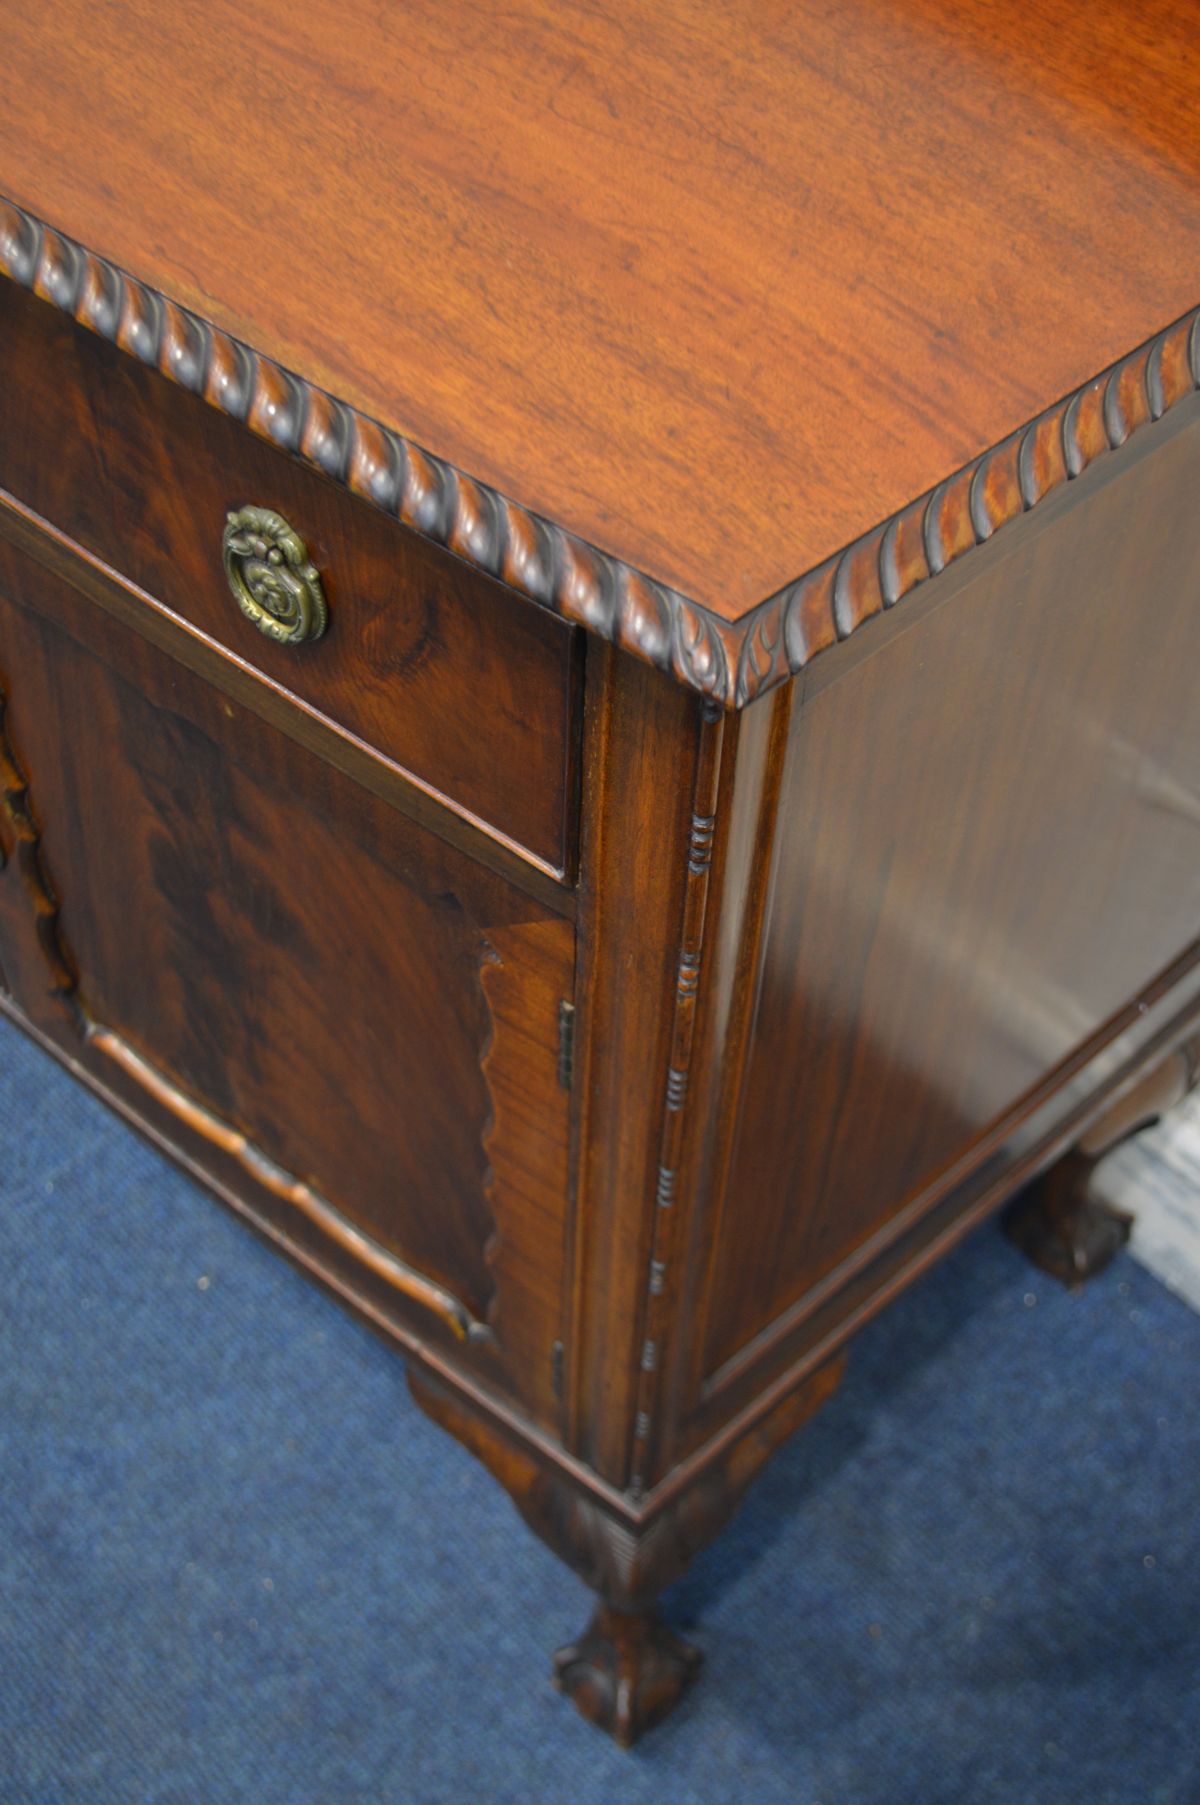 A 20TH CENTURY MAHOGANY BOWFRONT SIDEBOARD, with a shaped raised back, rope detail to the top - Image 3 of 4